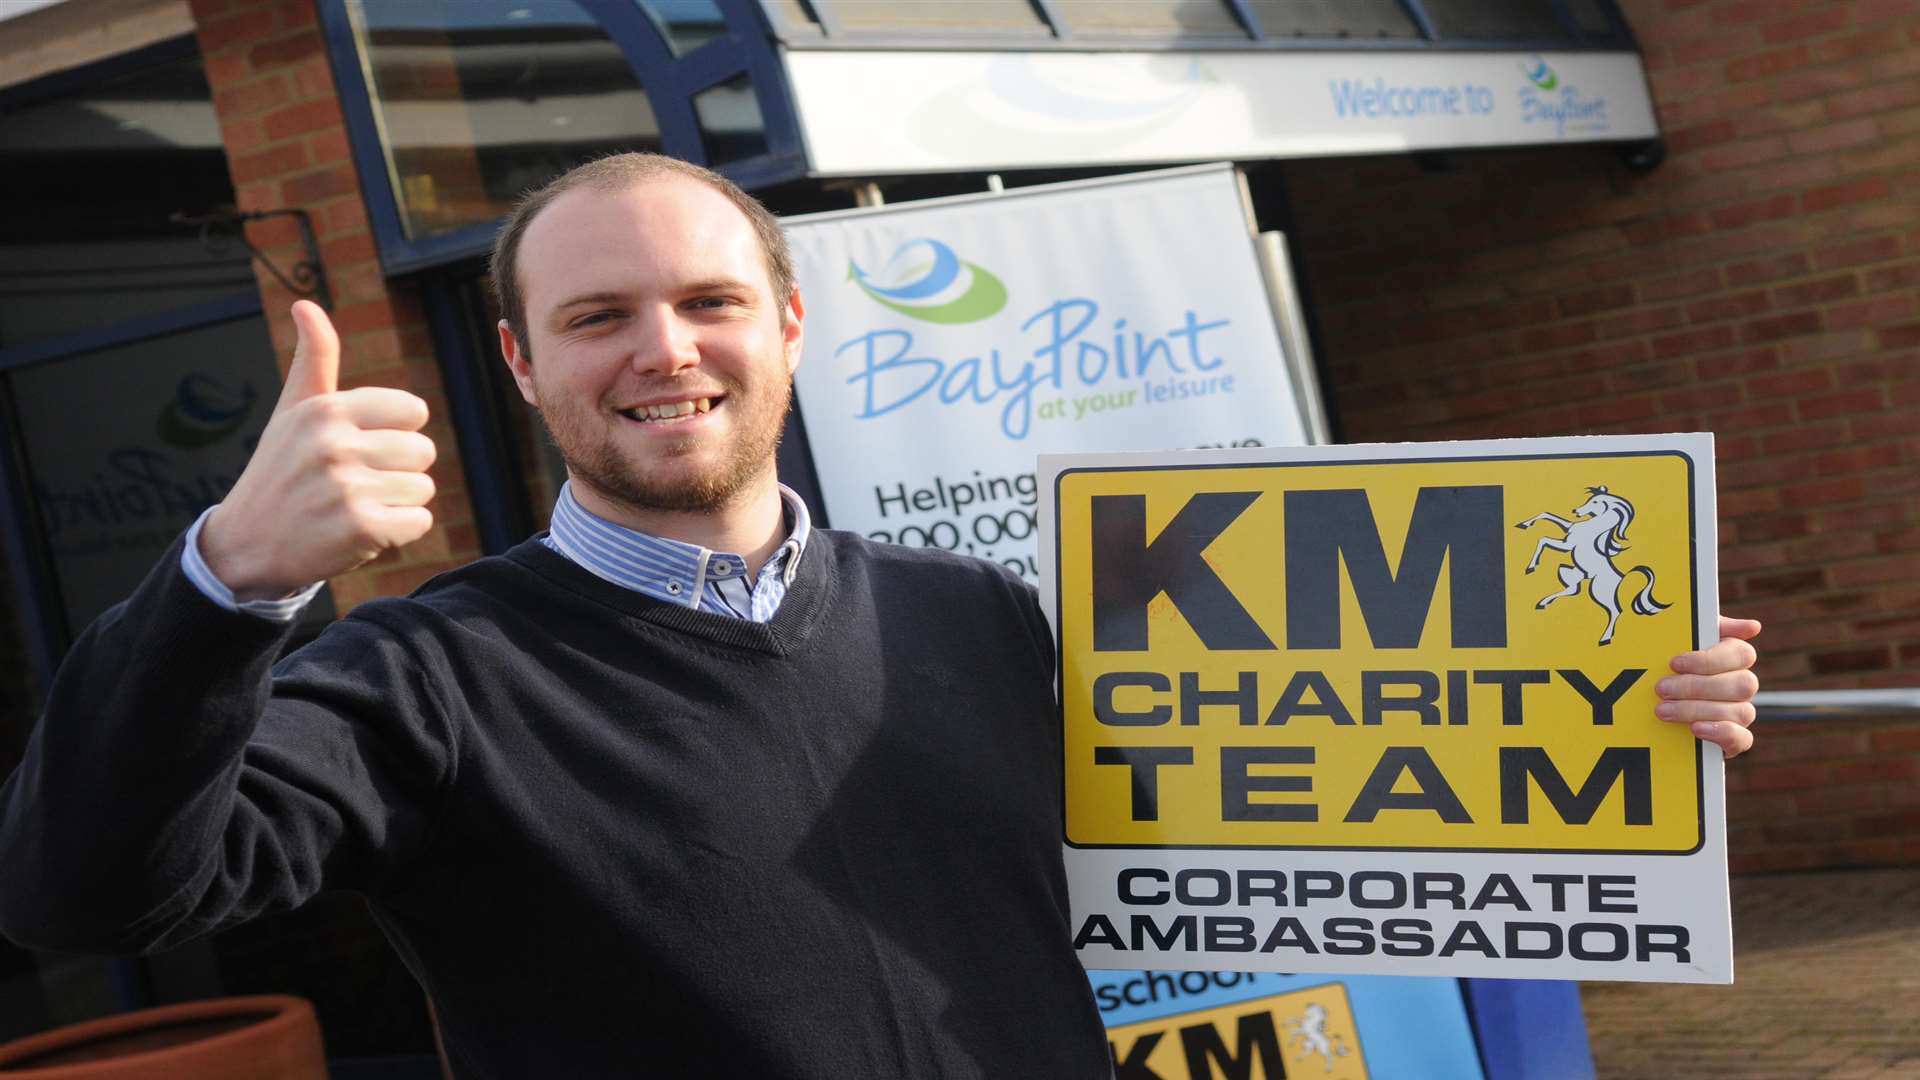 Sam Perkins from the BayPoint Club, Sandwich announces the company is now a Corporate Ambassador for the KM Charity Team.